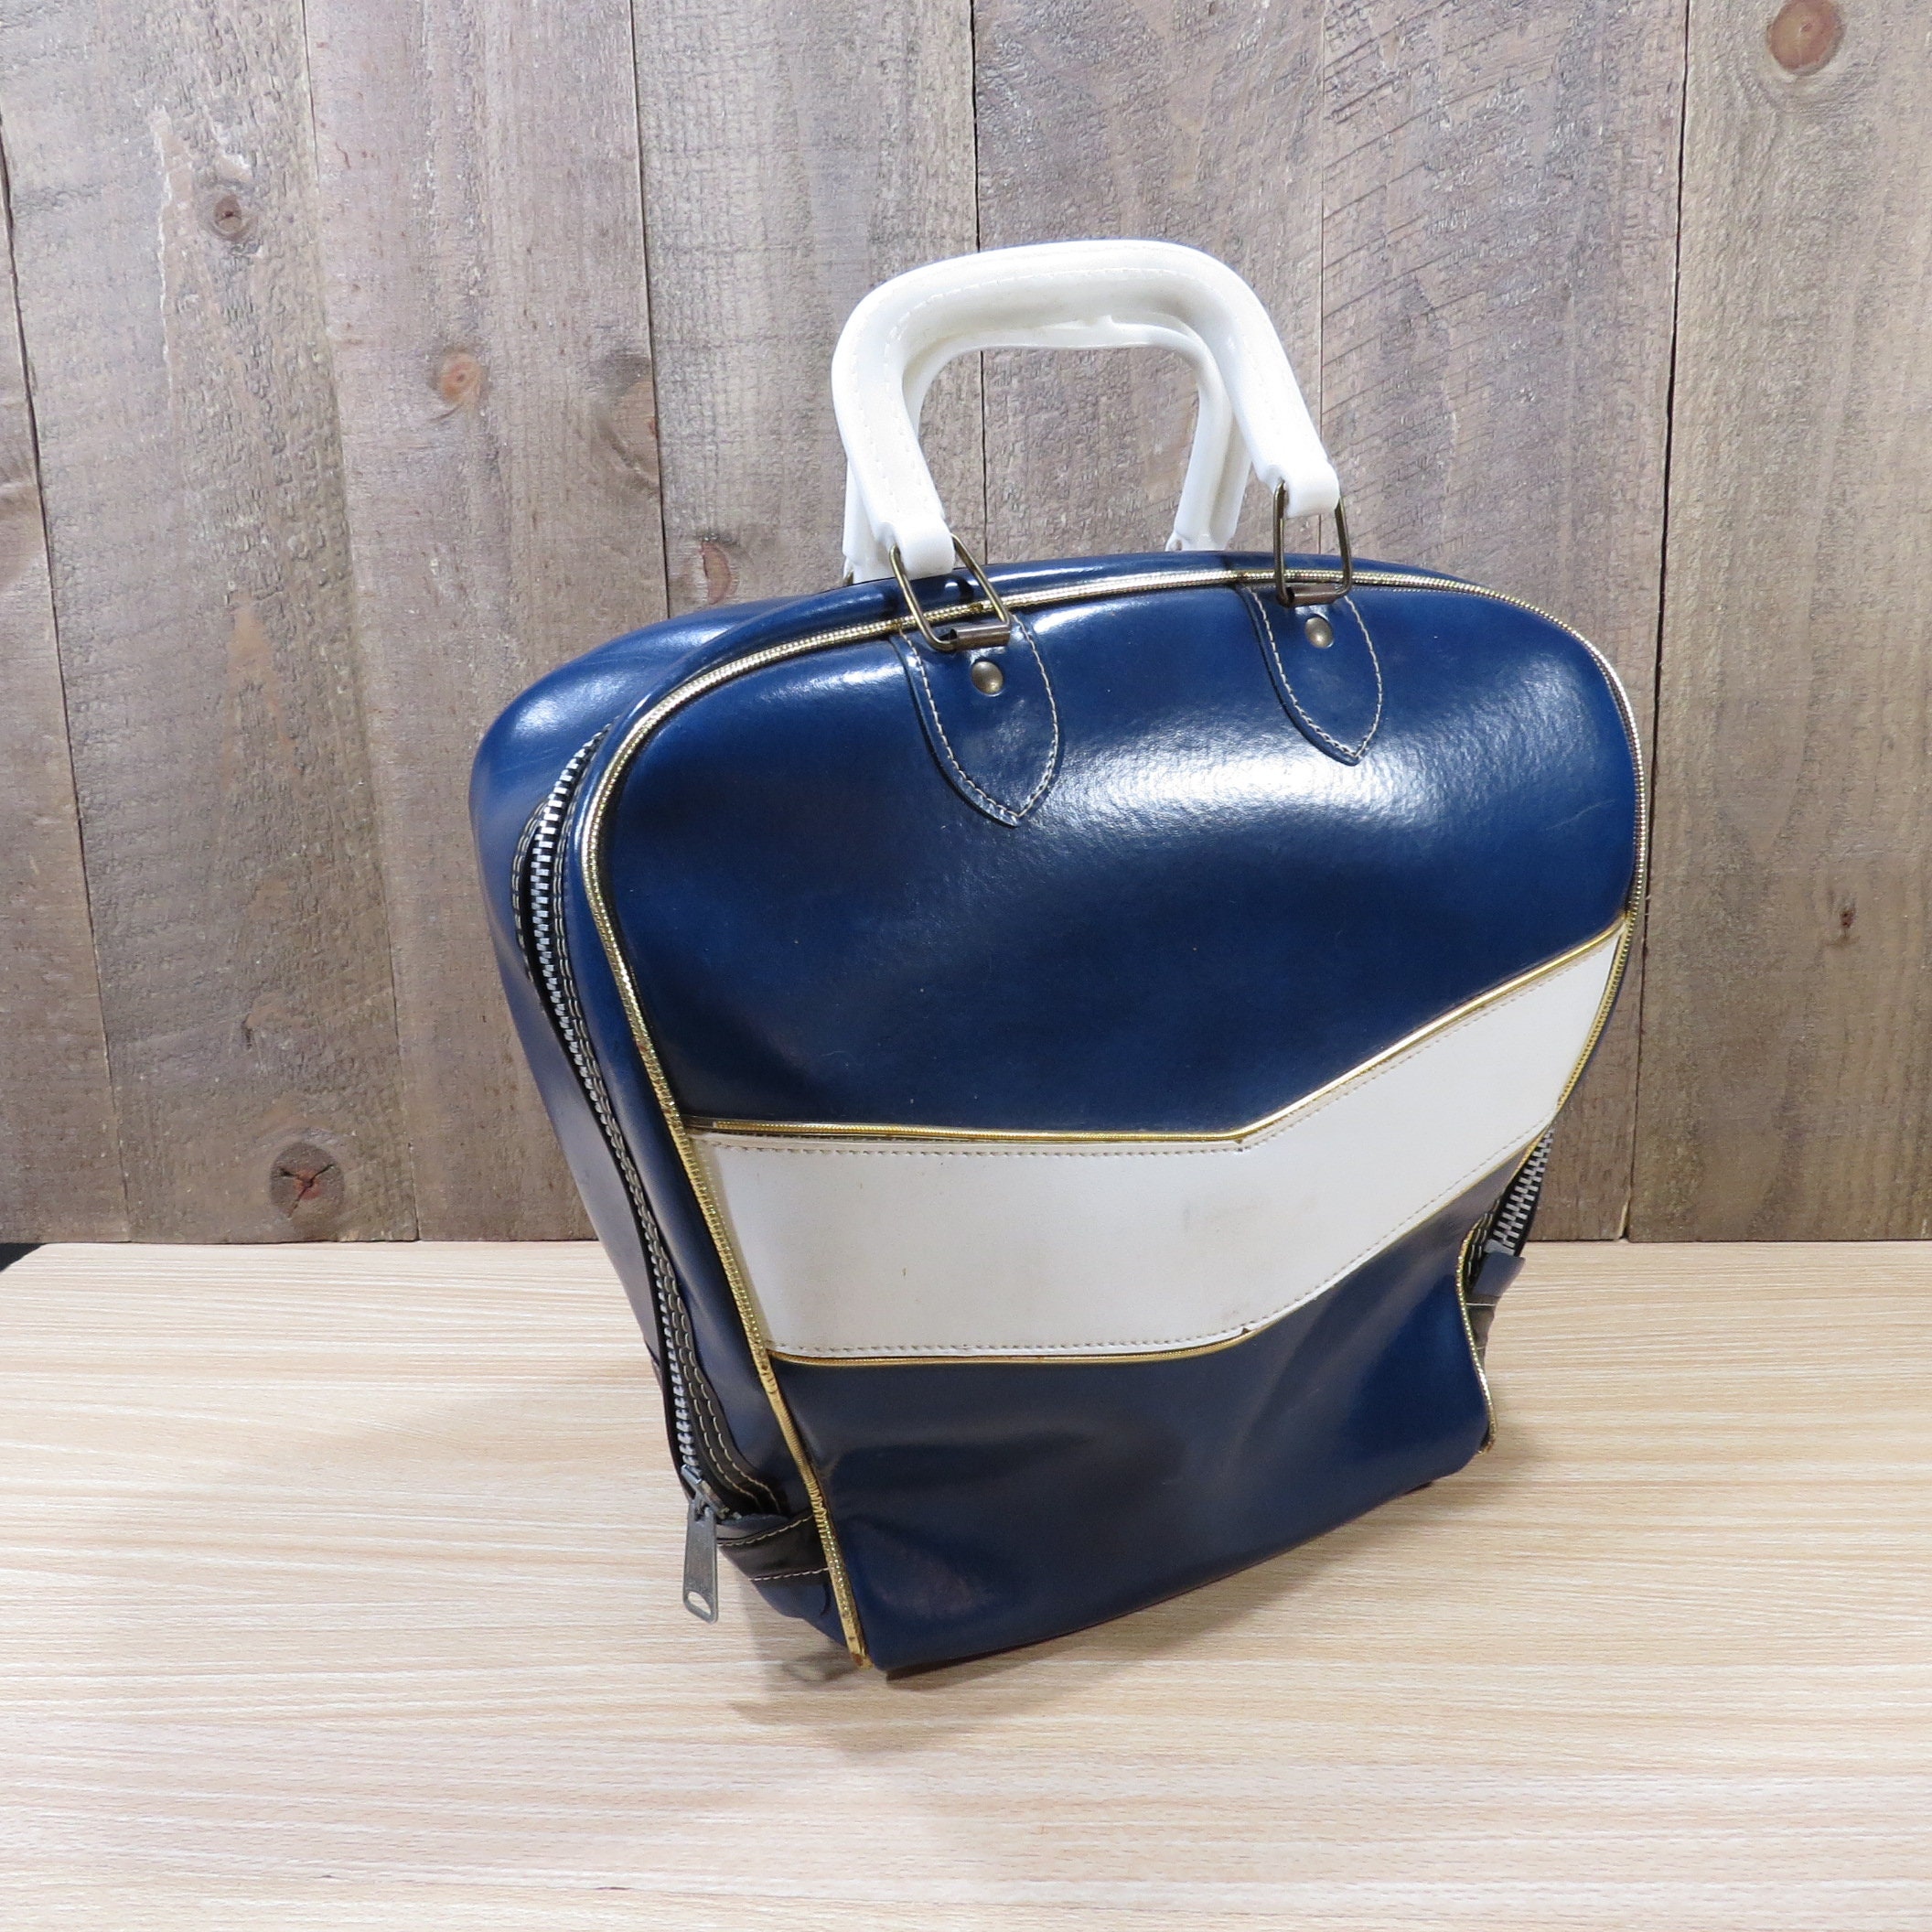 Vintage AMF Blue Leather Bowling Ball Bag Retro Style